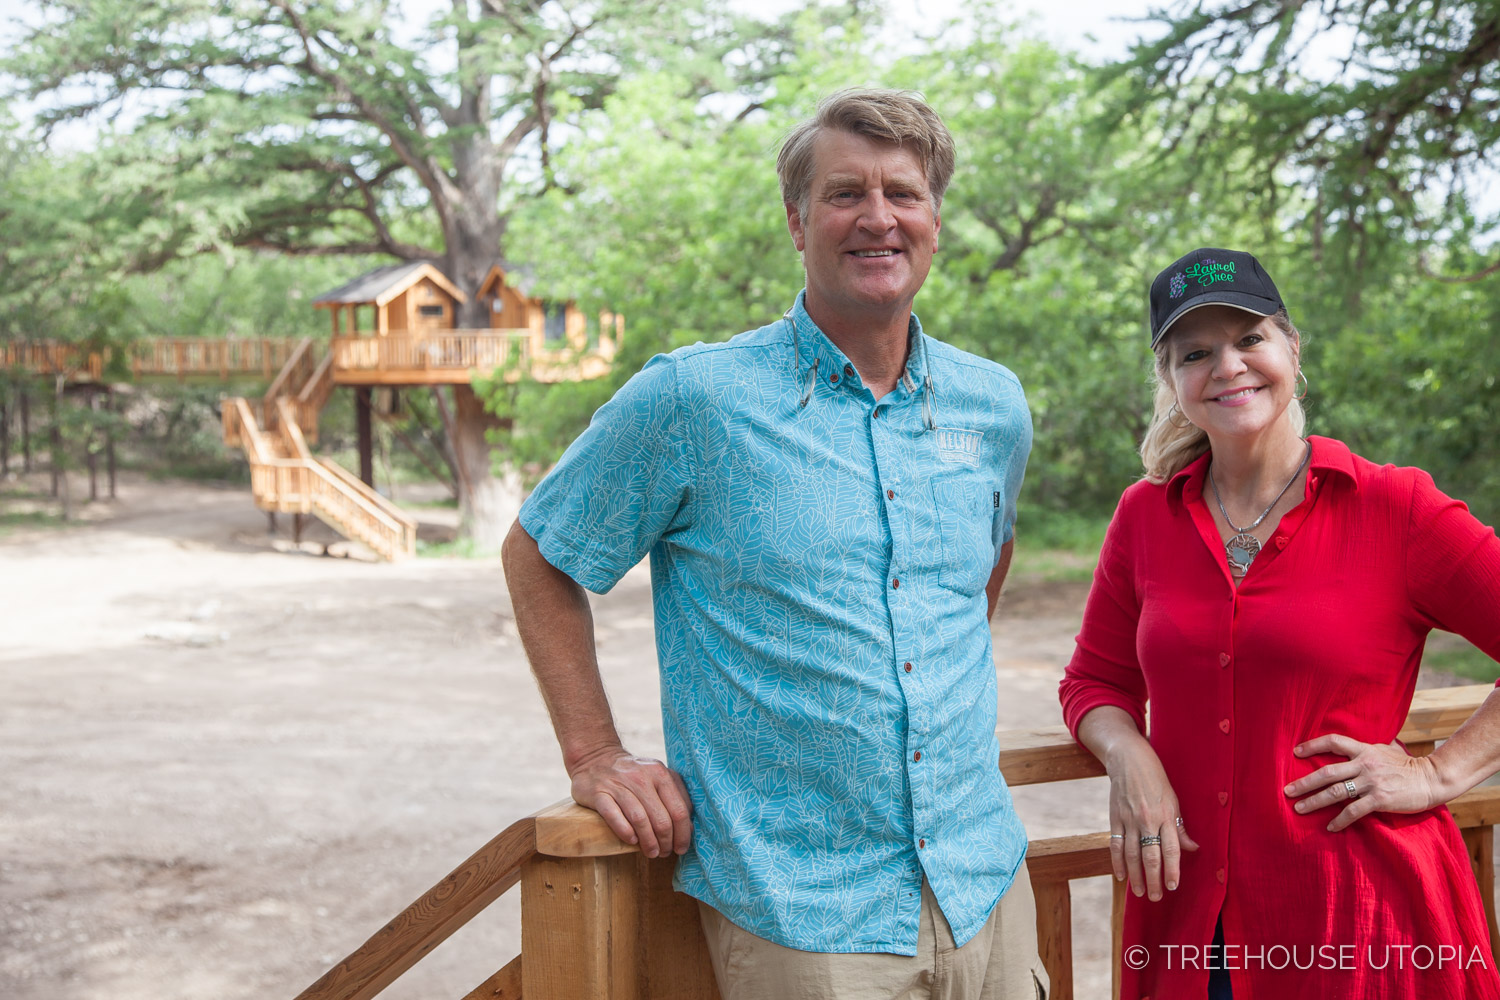  Pete Nelson and Laurel Waters at Treehouse Utopia 